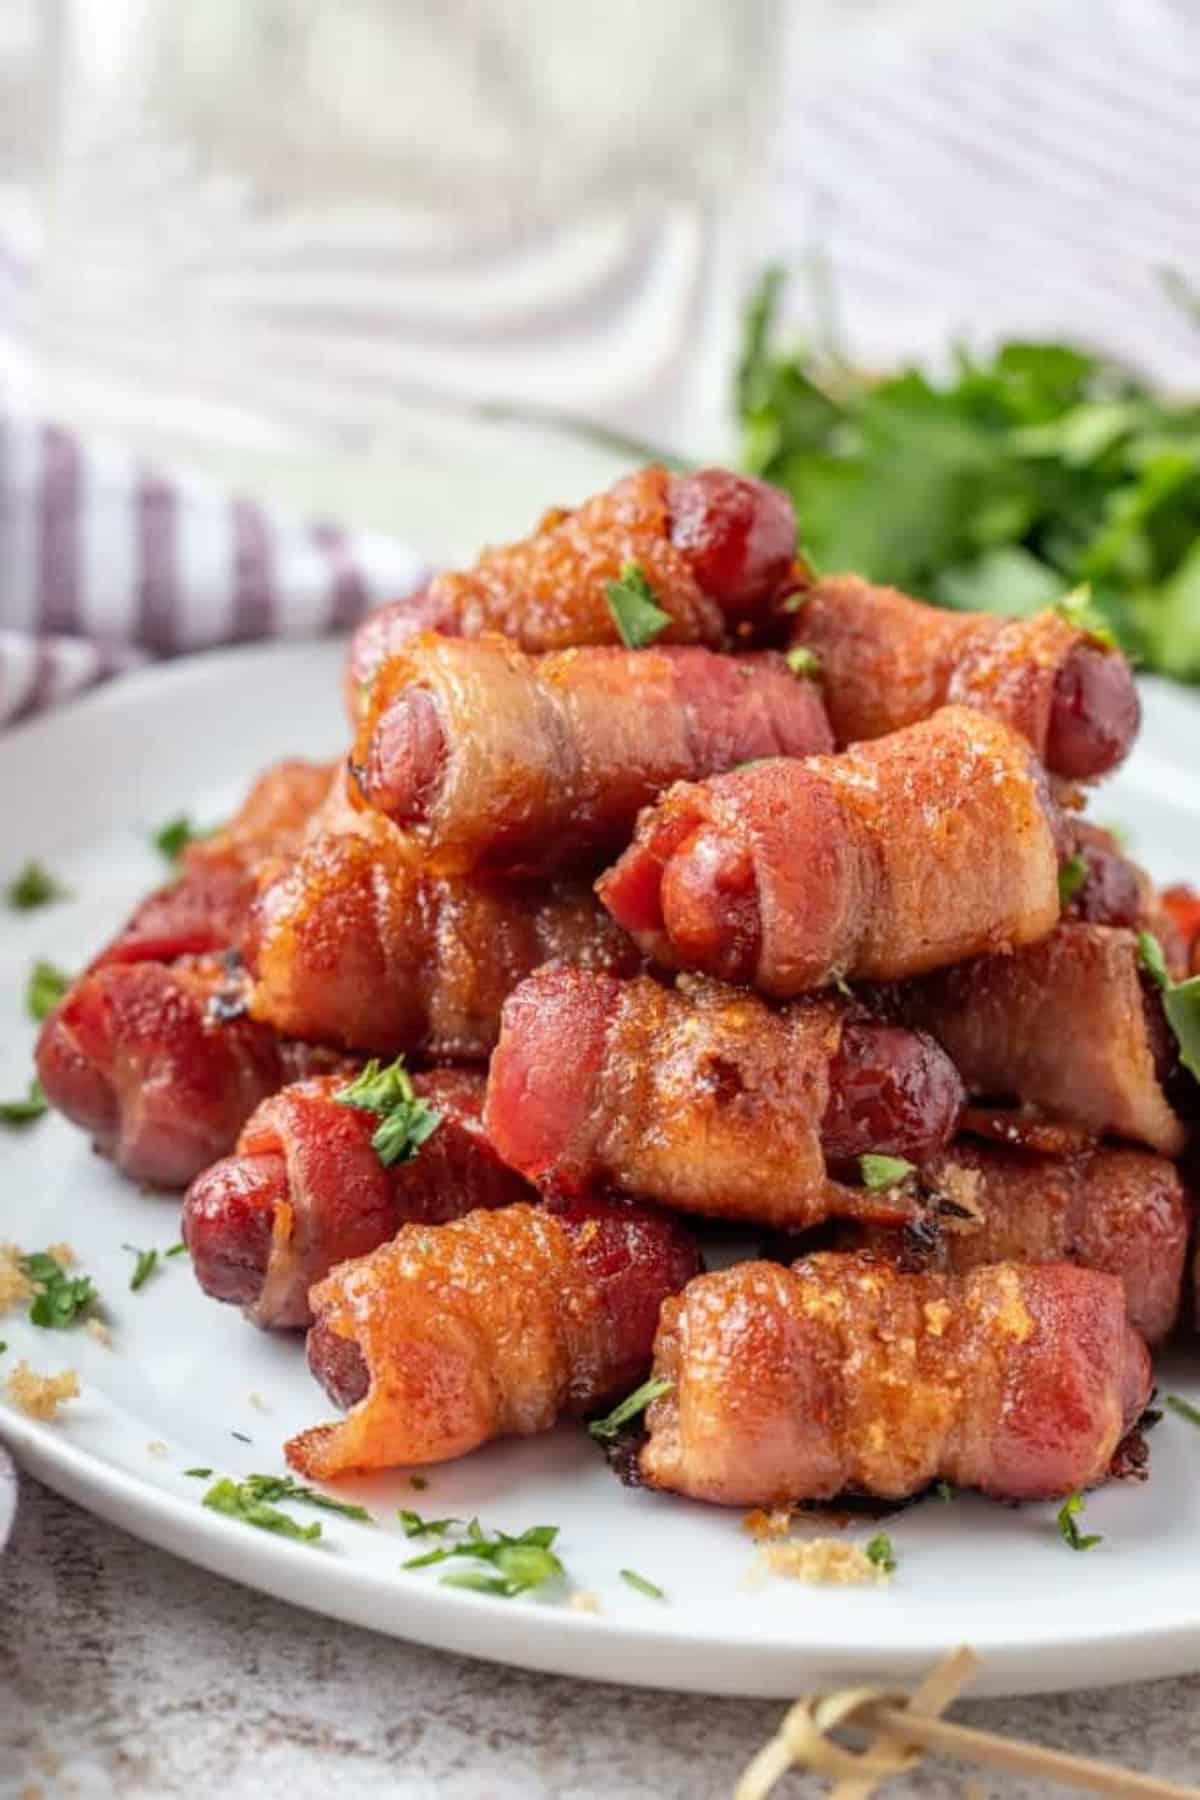 Brown Sugar Bacon Wrapped Smokies piled on a white plate